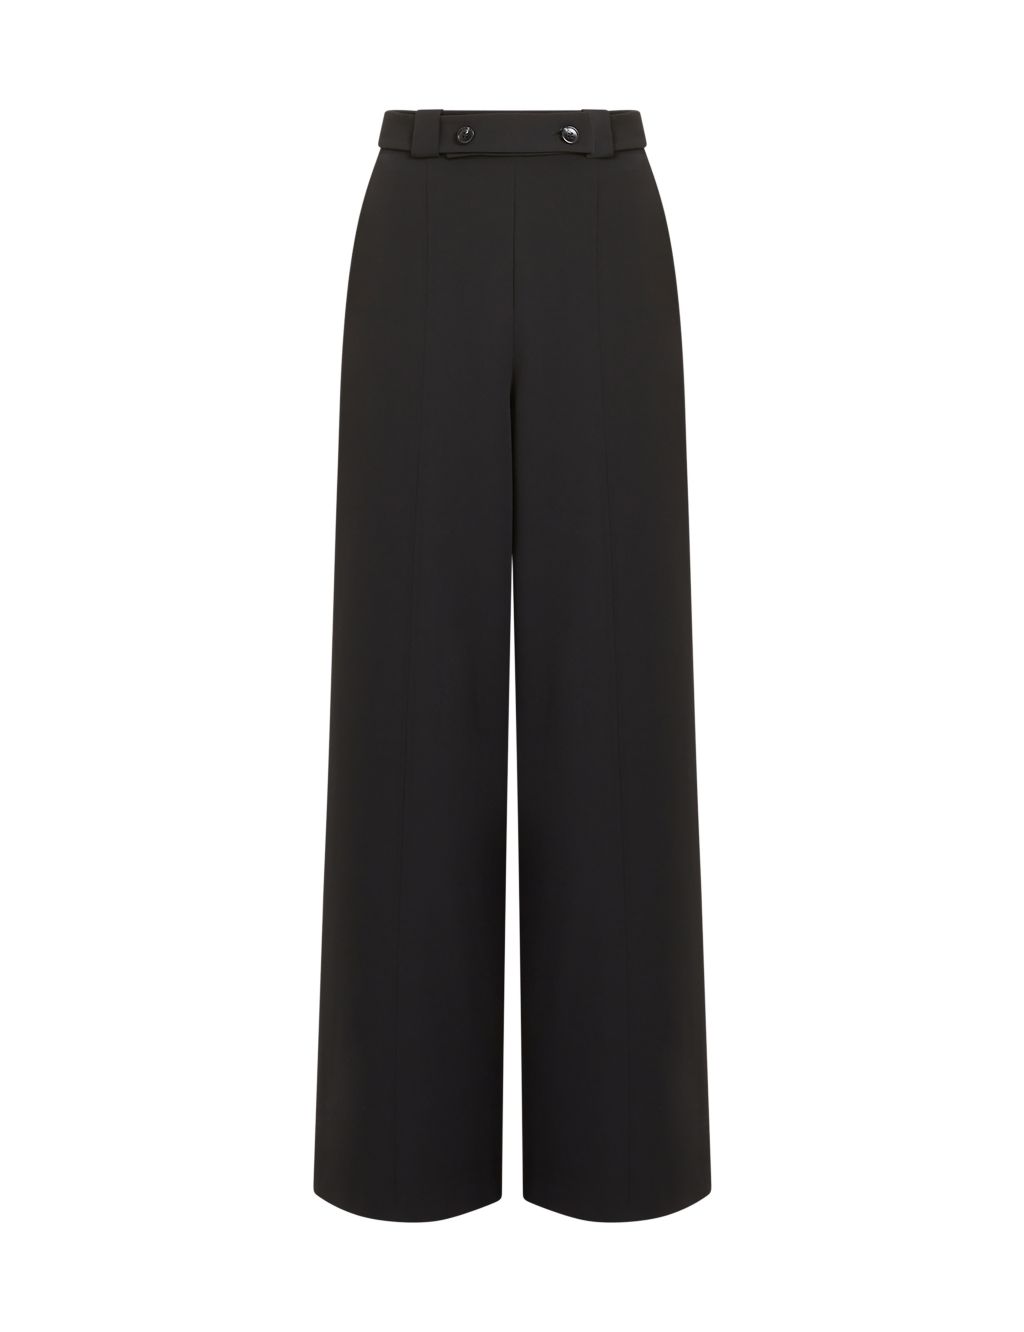 Crepe Drawstring Wide Leg Trousers, M&S Collection